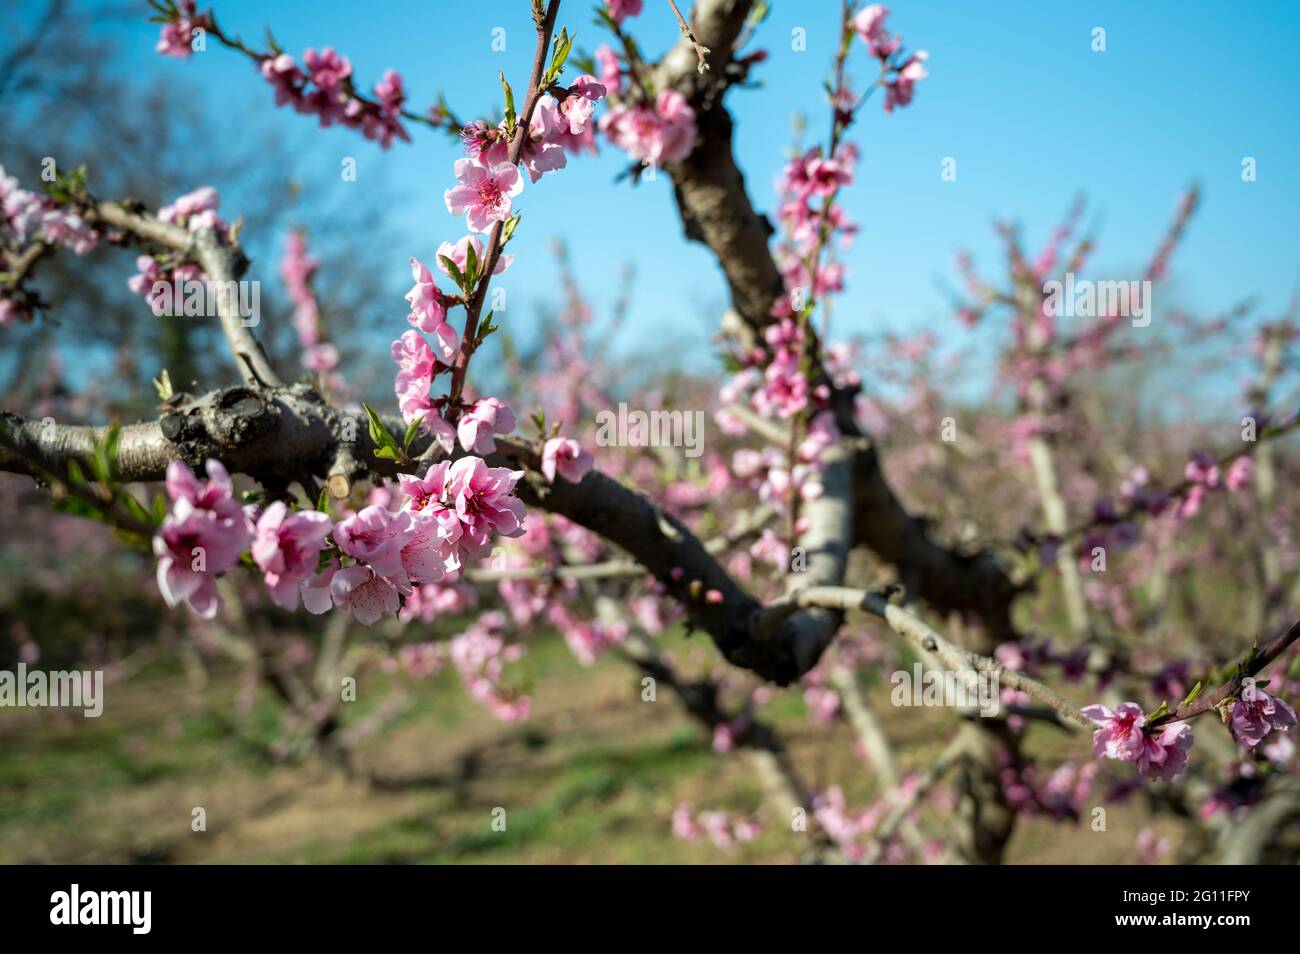 Pink blossoms on a fruit tree within an orchard Stock Photo